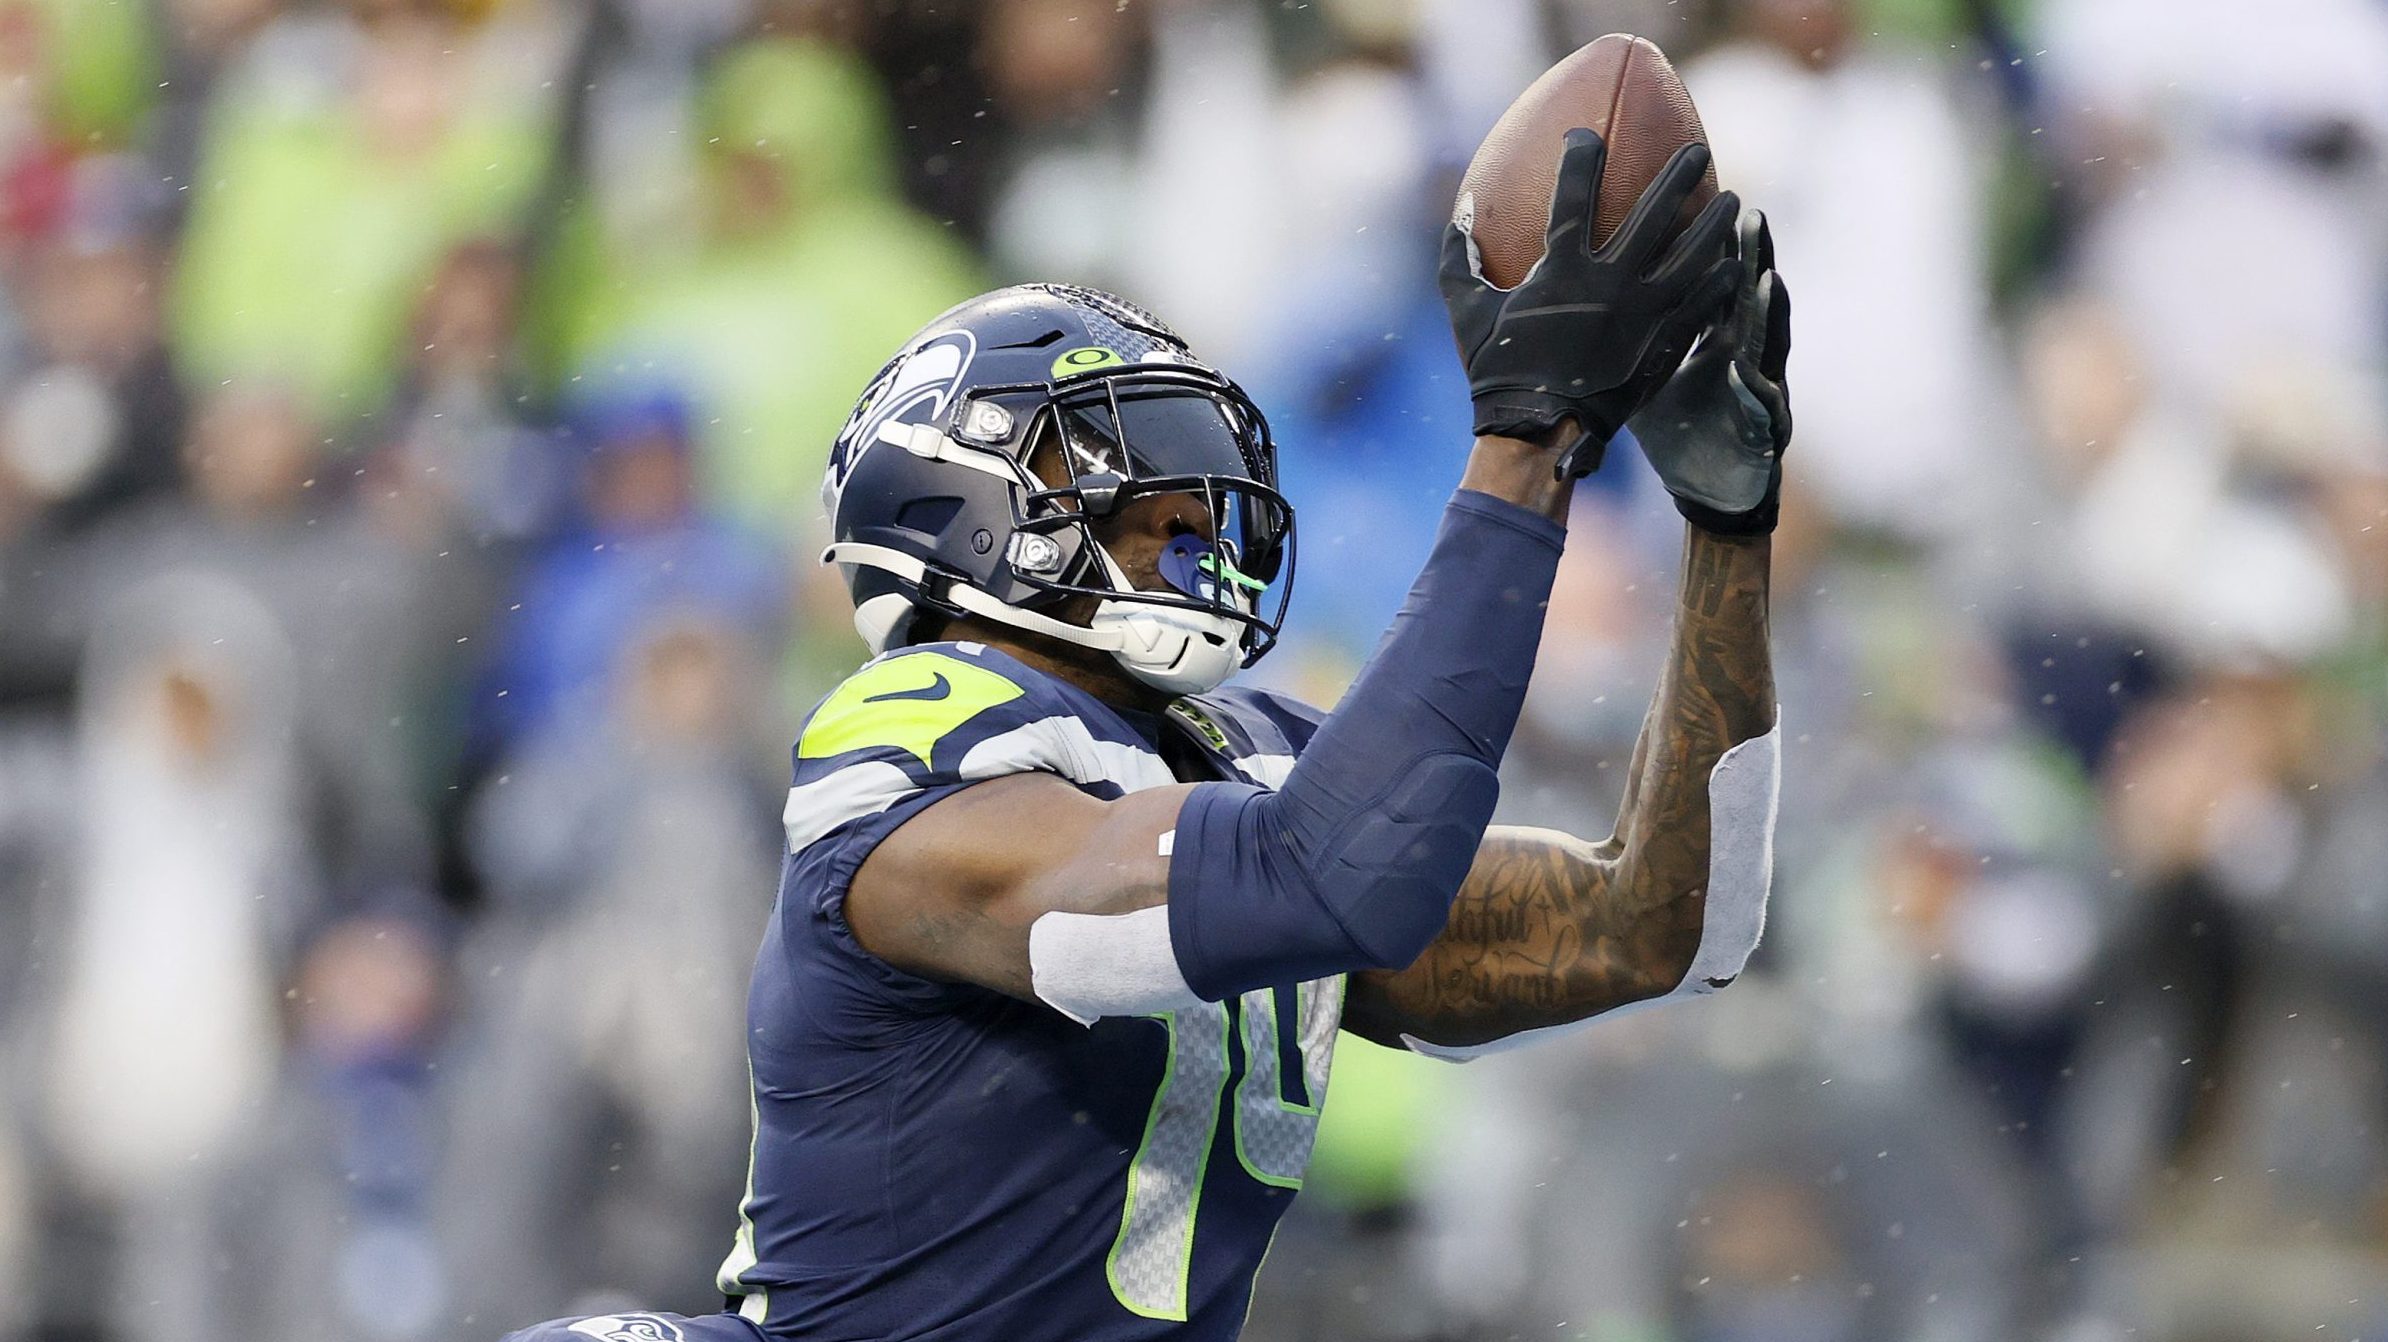 DK Metcalf #14 of the Seattle Seahawks catches a pass for a touchdown against the Detroit Lions dur...